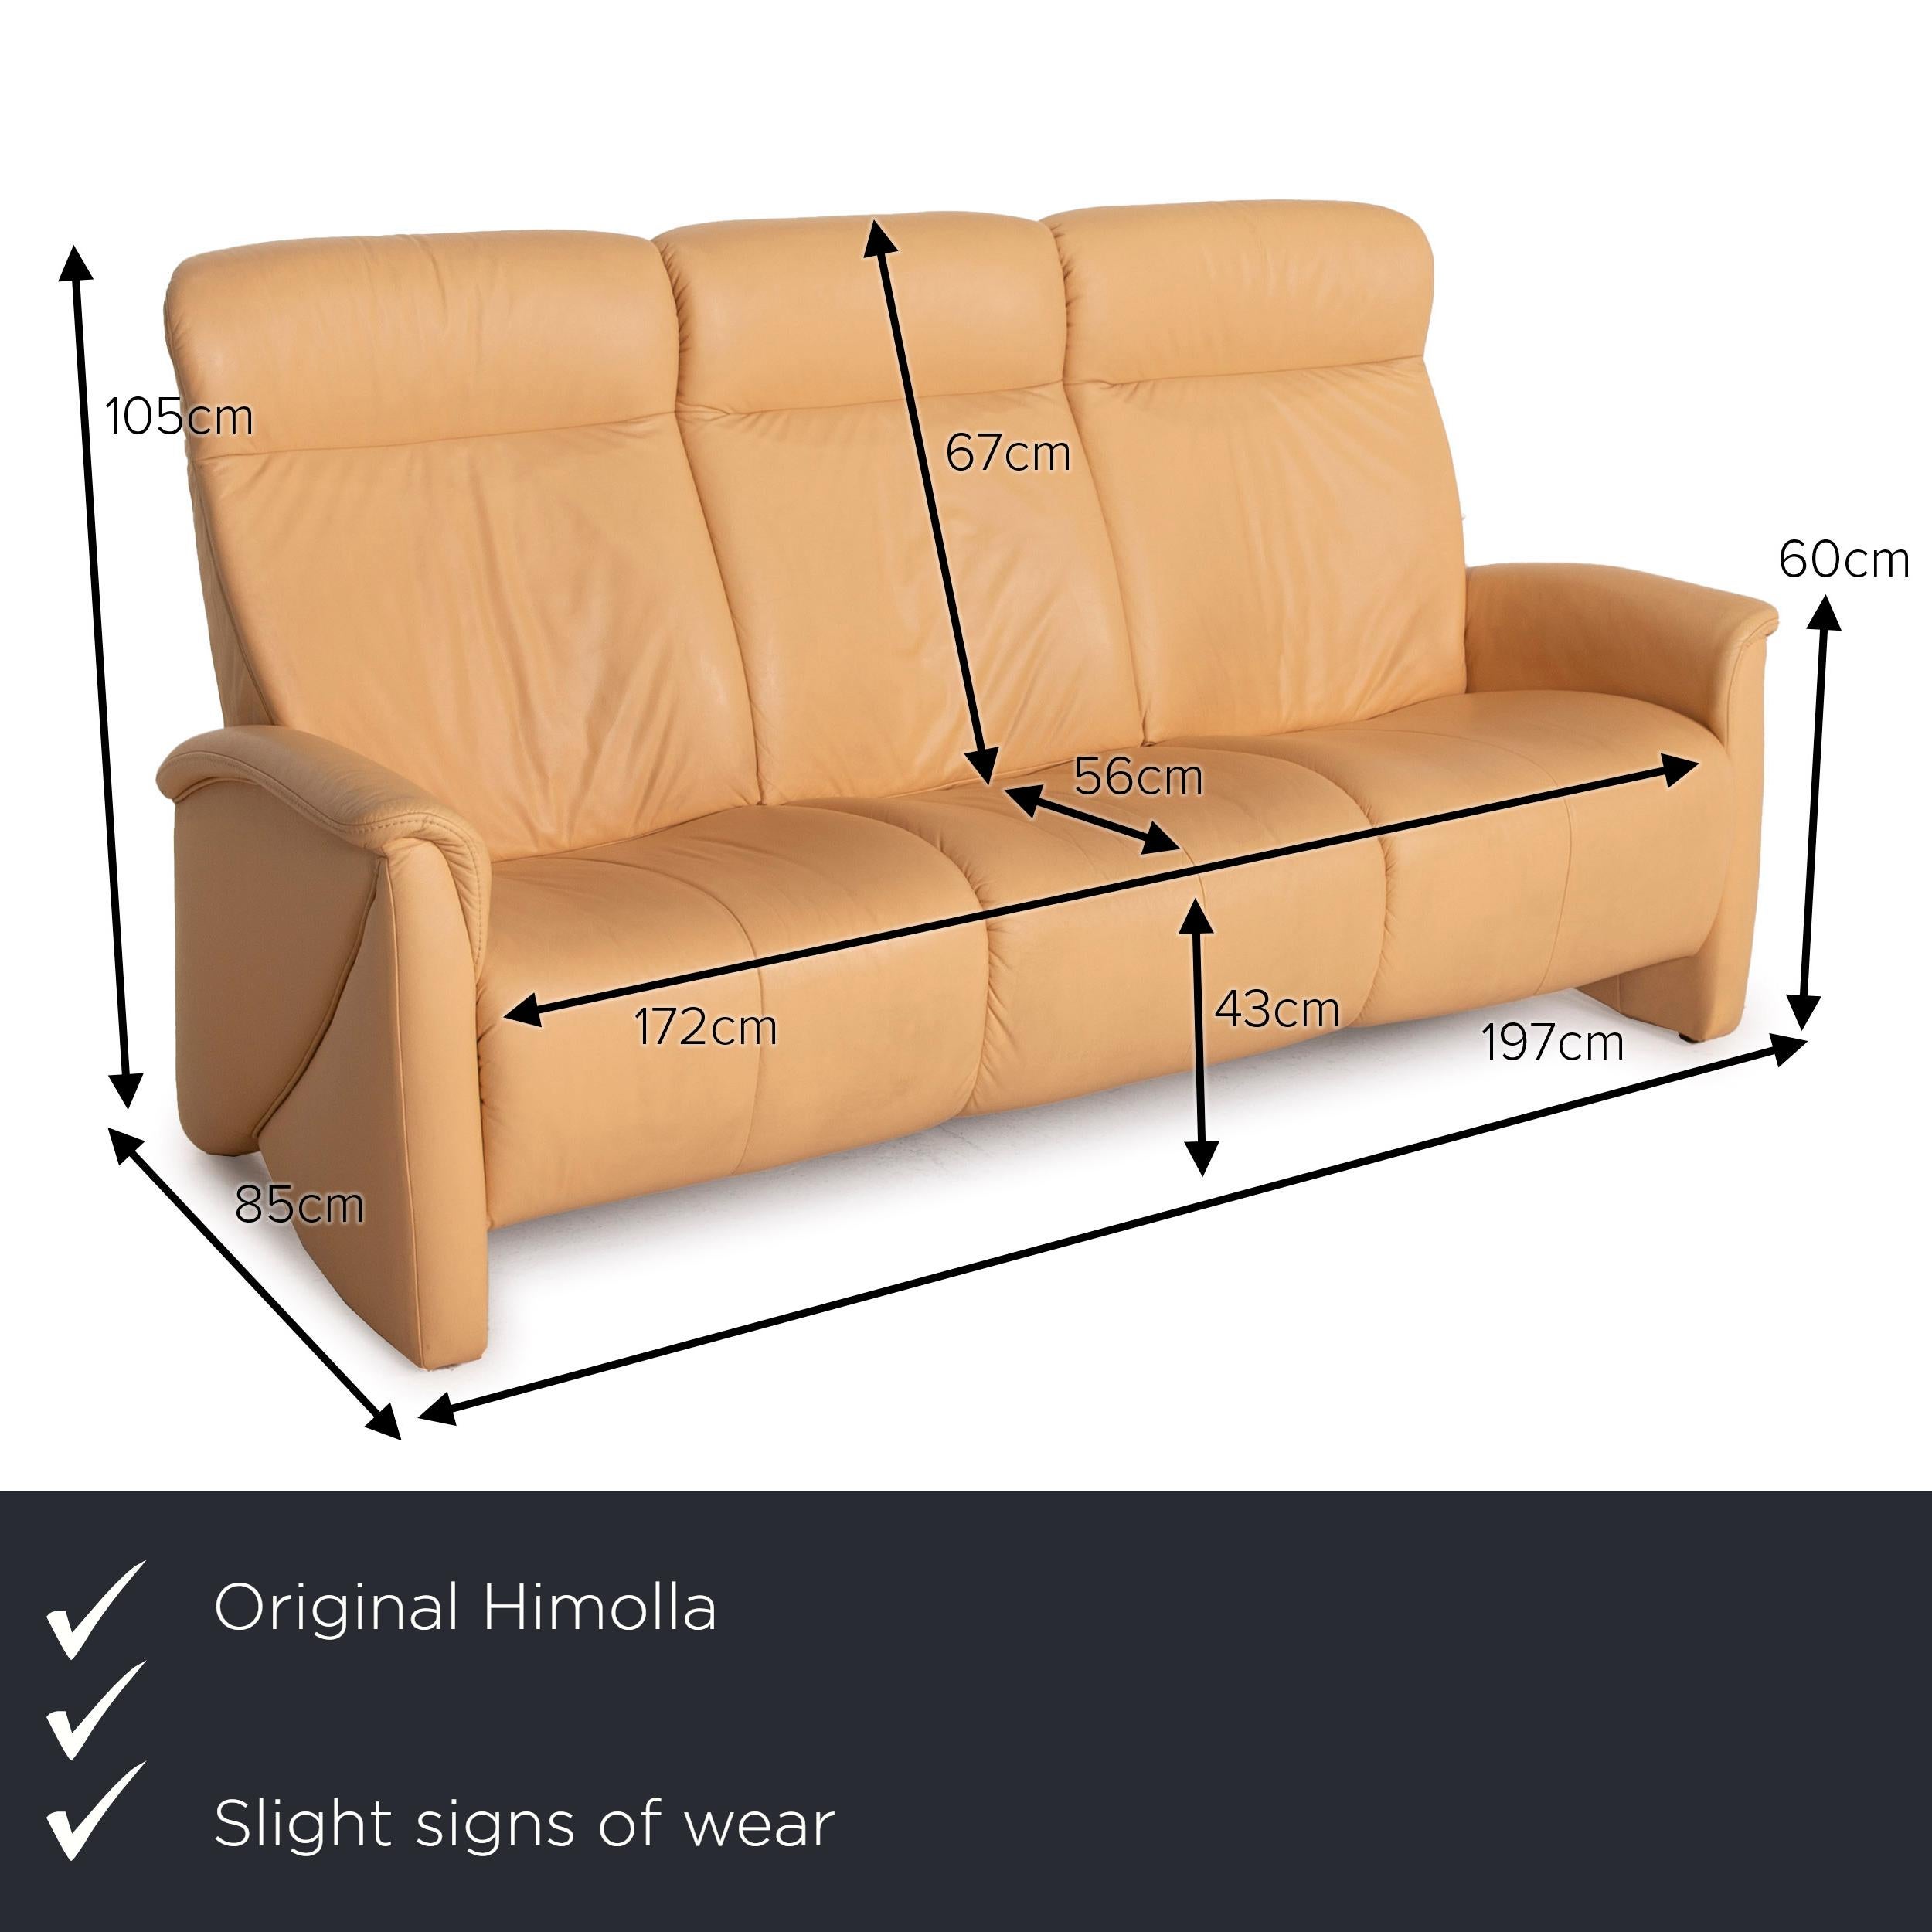 We present to you a Himolla leather sofa beige three-seater.


 Product measurements in centimeters:
 

Depth: 85
Width: 197
Height: 105
Seat height: 43
Rest height: 60
Seat depth: 56
Seat width: 172
Back height: 67.
 